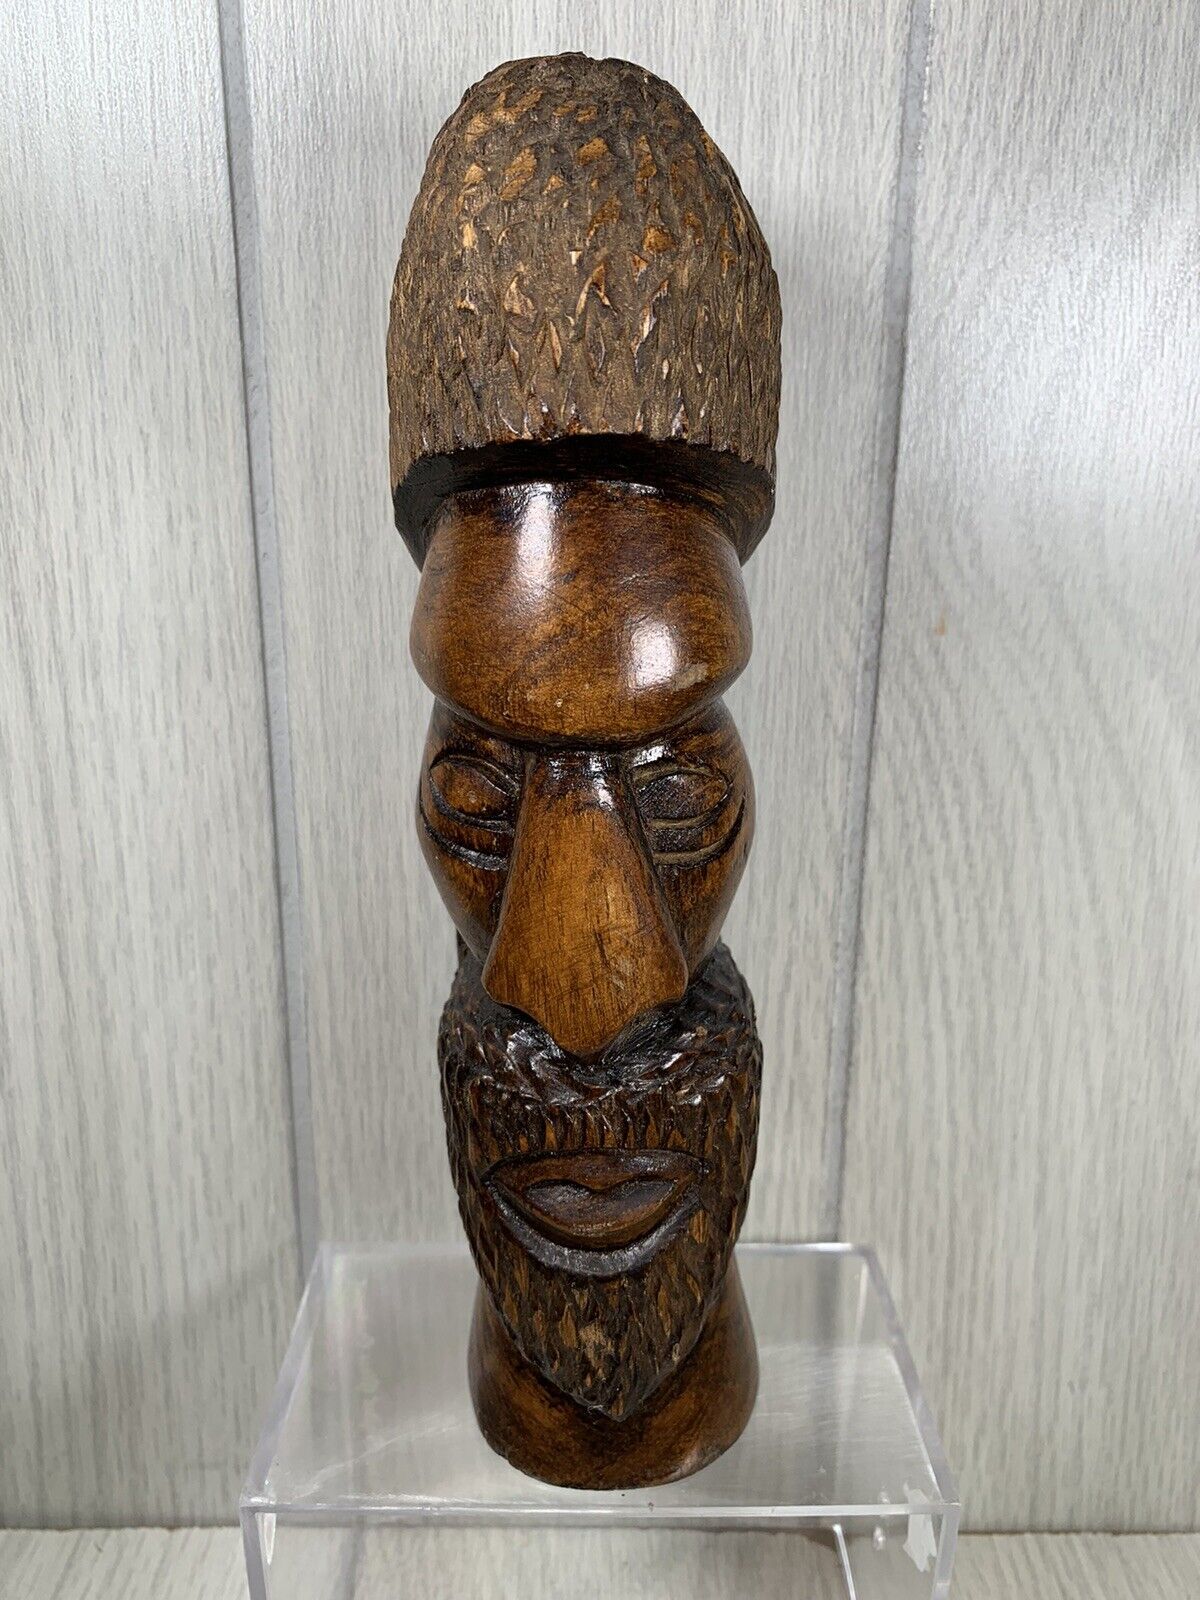 Vtg Hand Carved African Bearded Man Wooden Sculpture Bust Head Decoration 7-1/2”